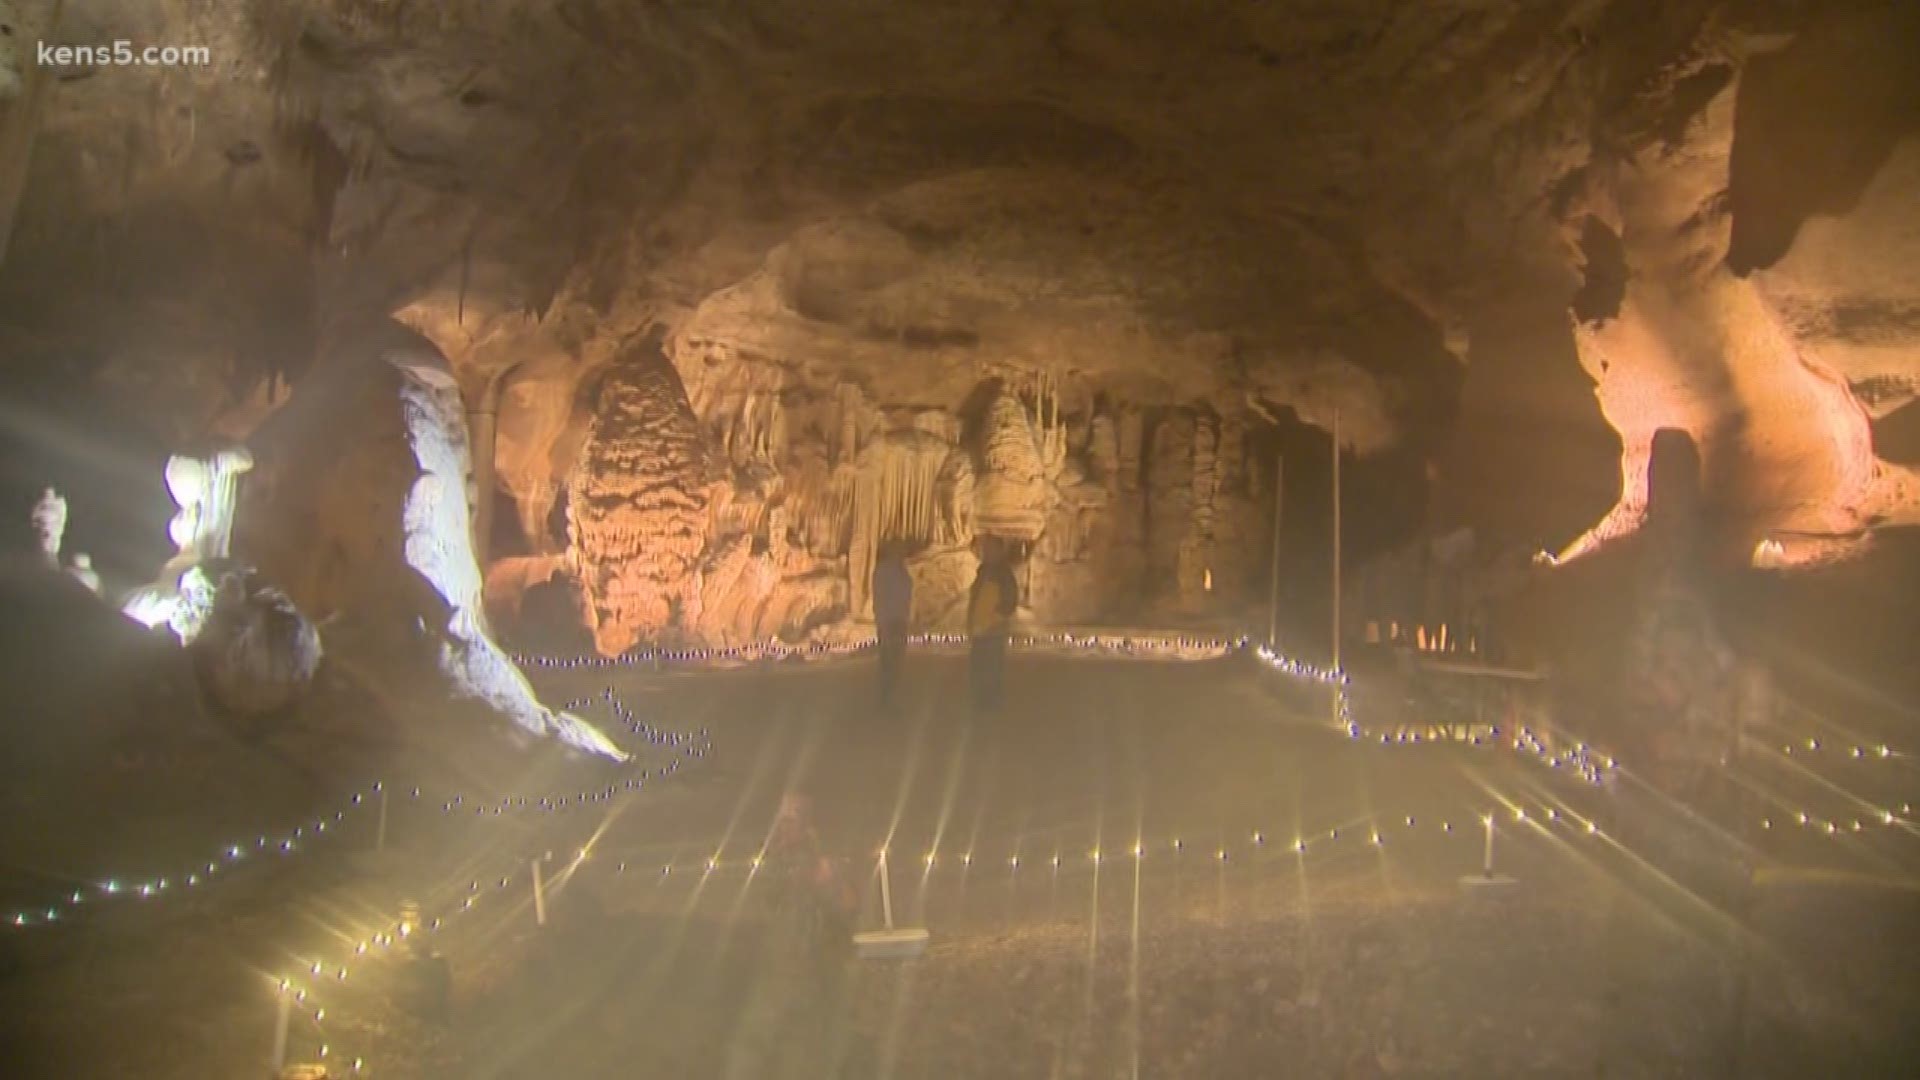 KENS 5's Barry Davis dives into the Cave Without a Name north of San Antonio for this week's Texas Outdoors.